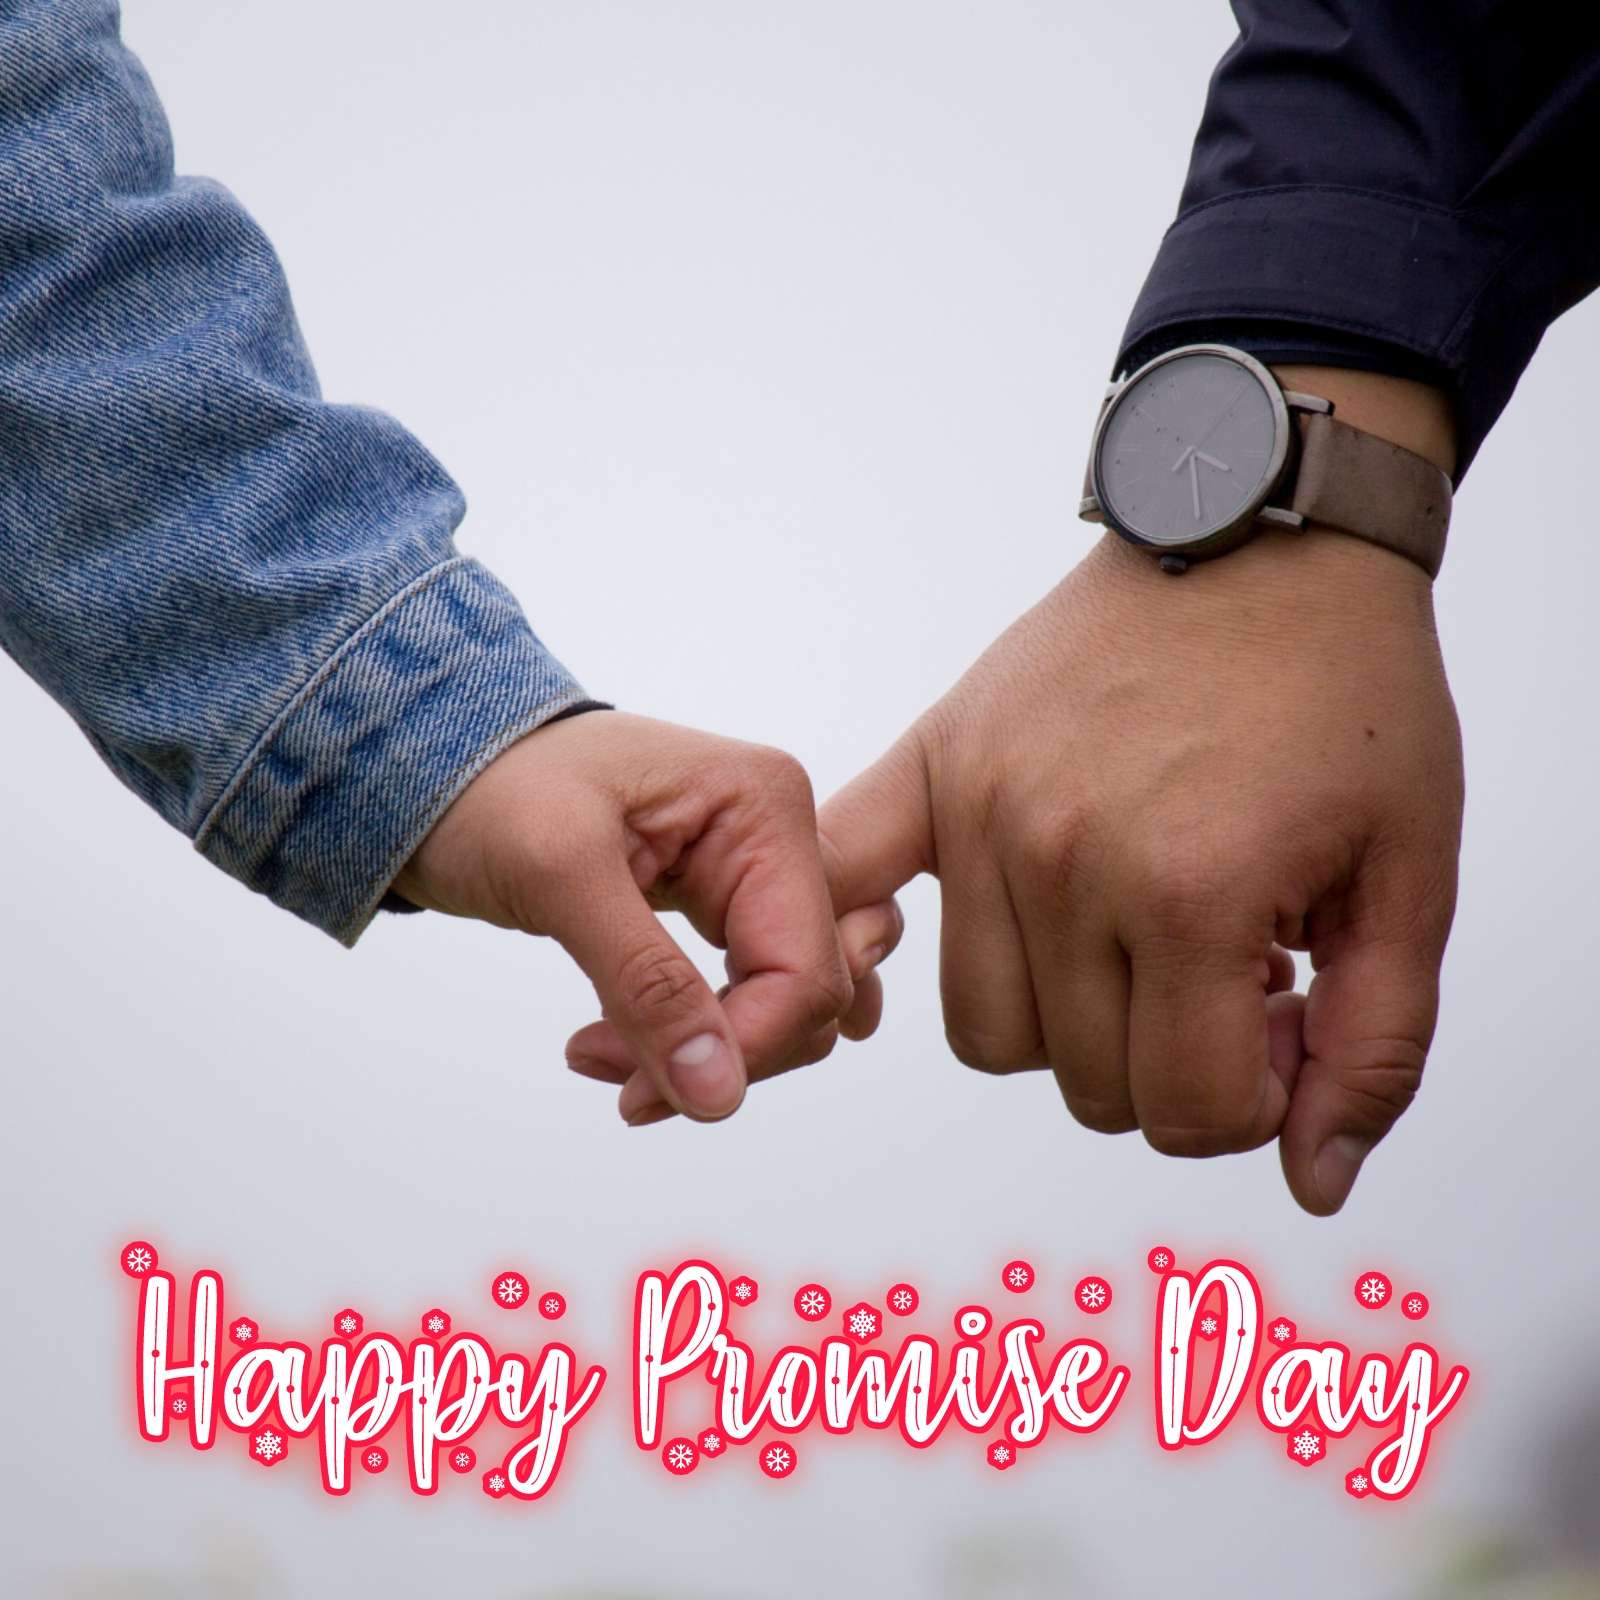 Happy Promise Day Images Download